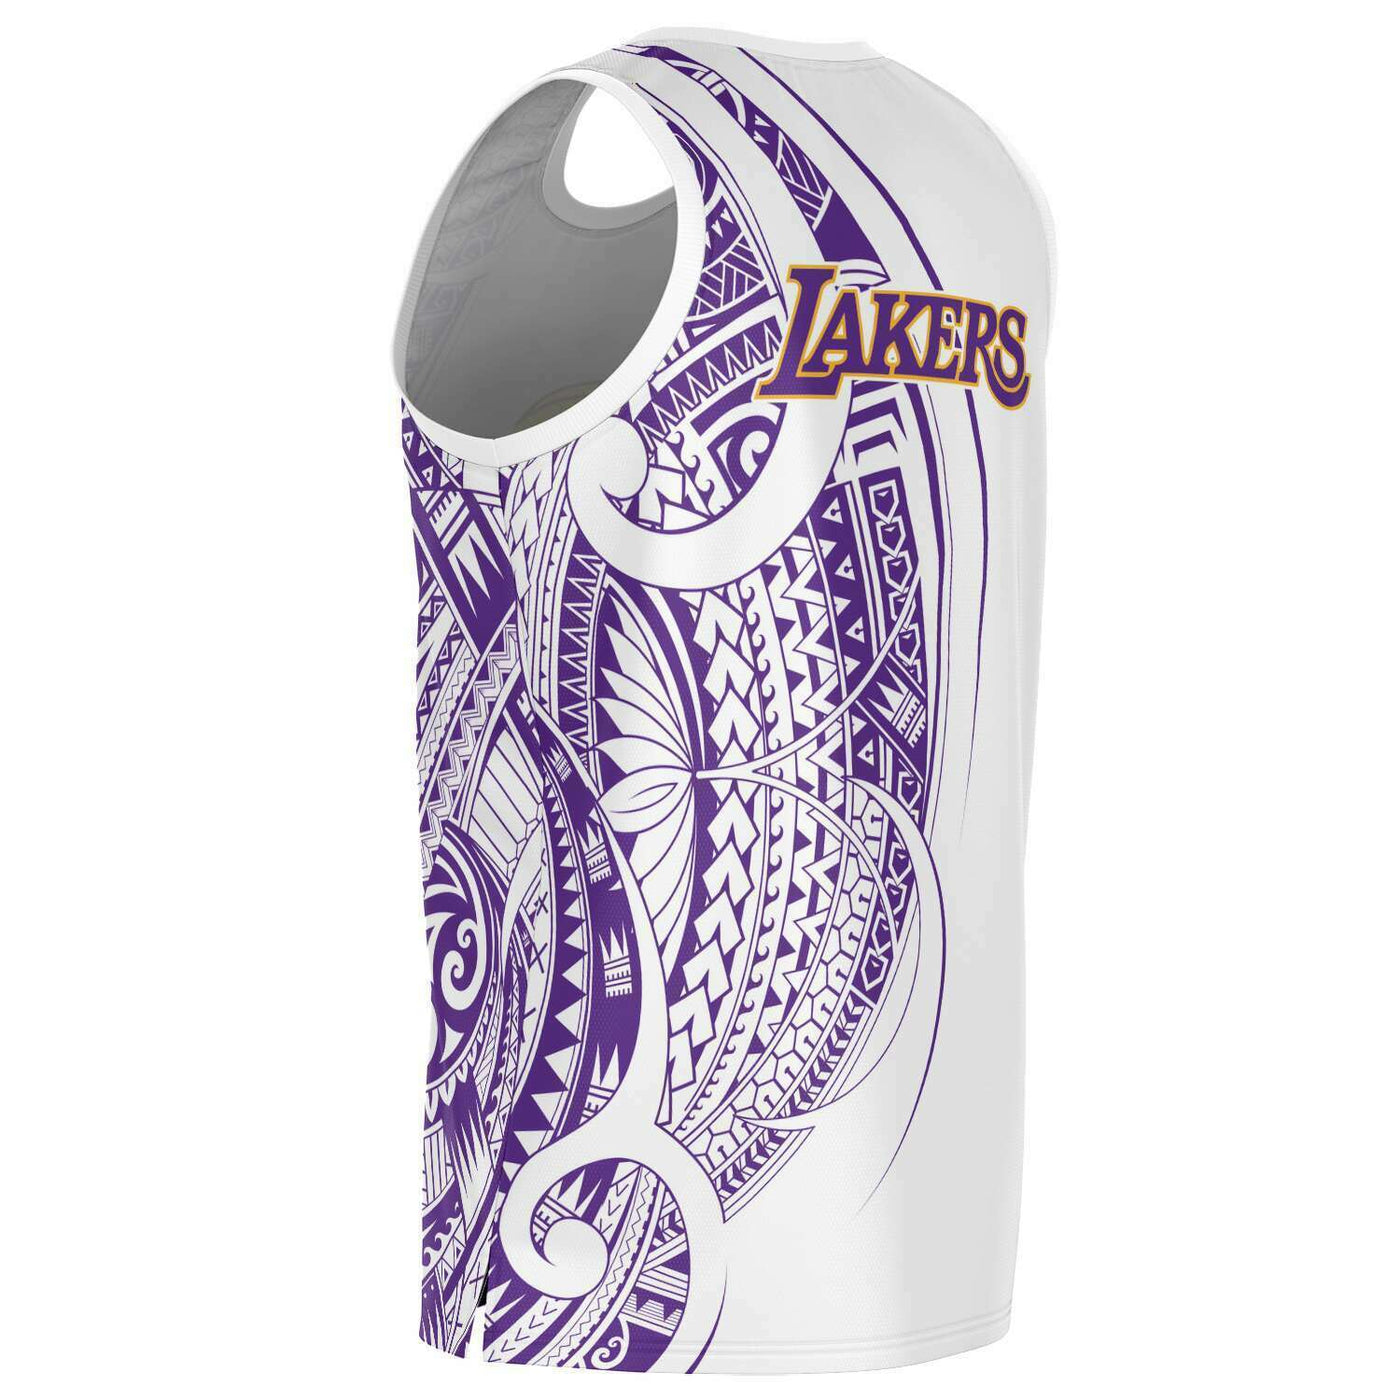 Subliminator Los Angeles Lakers Basketball Jersey White